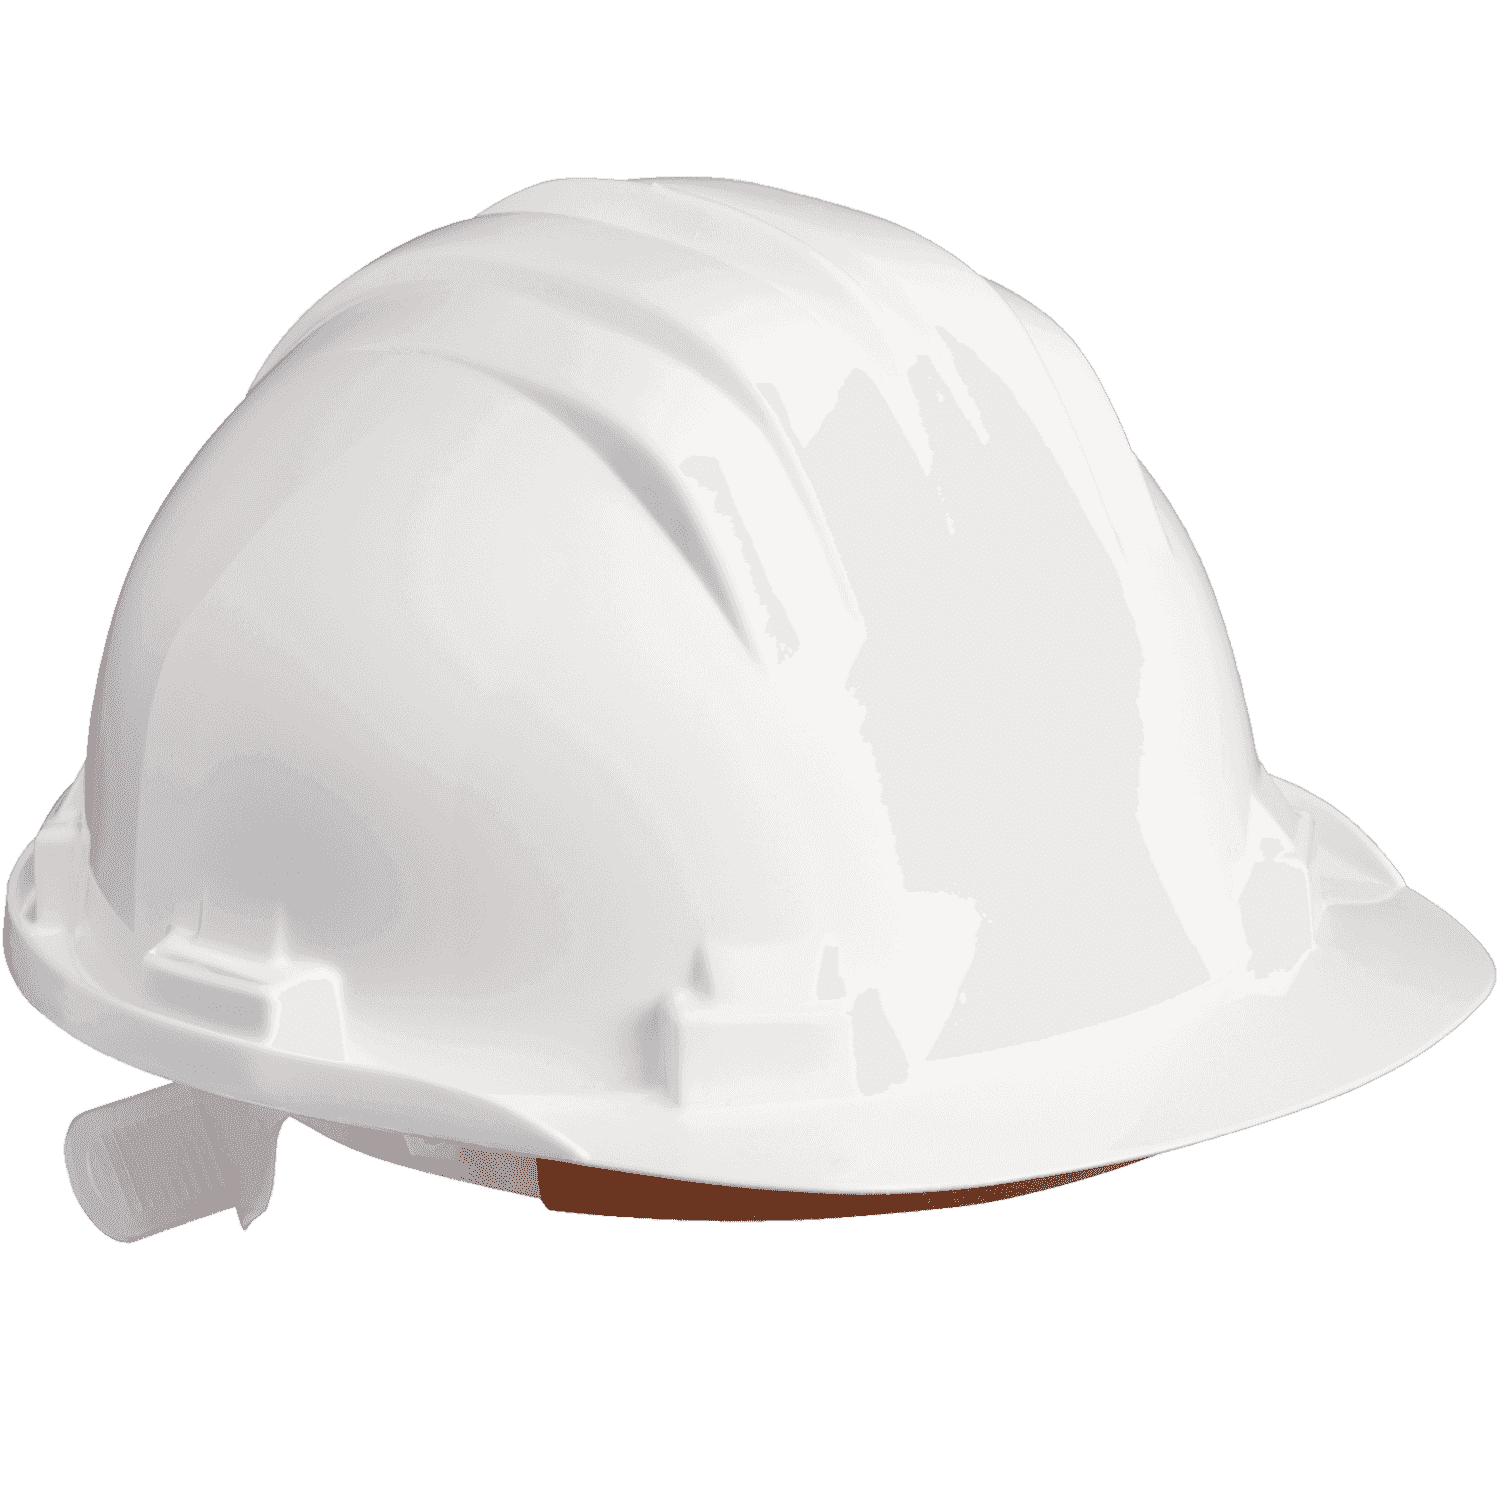 Climax 5-RS Manual Adjustment Safety Helmet White